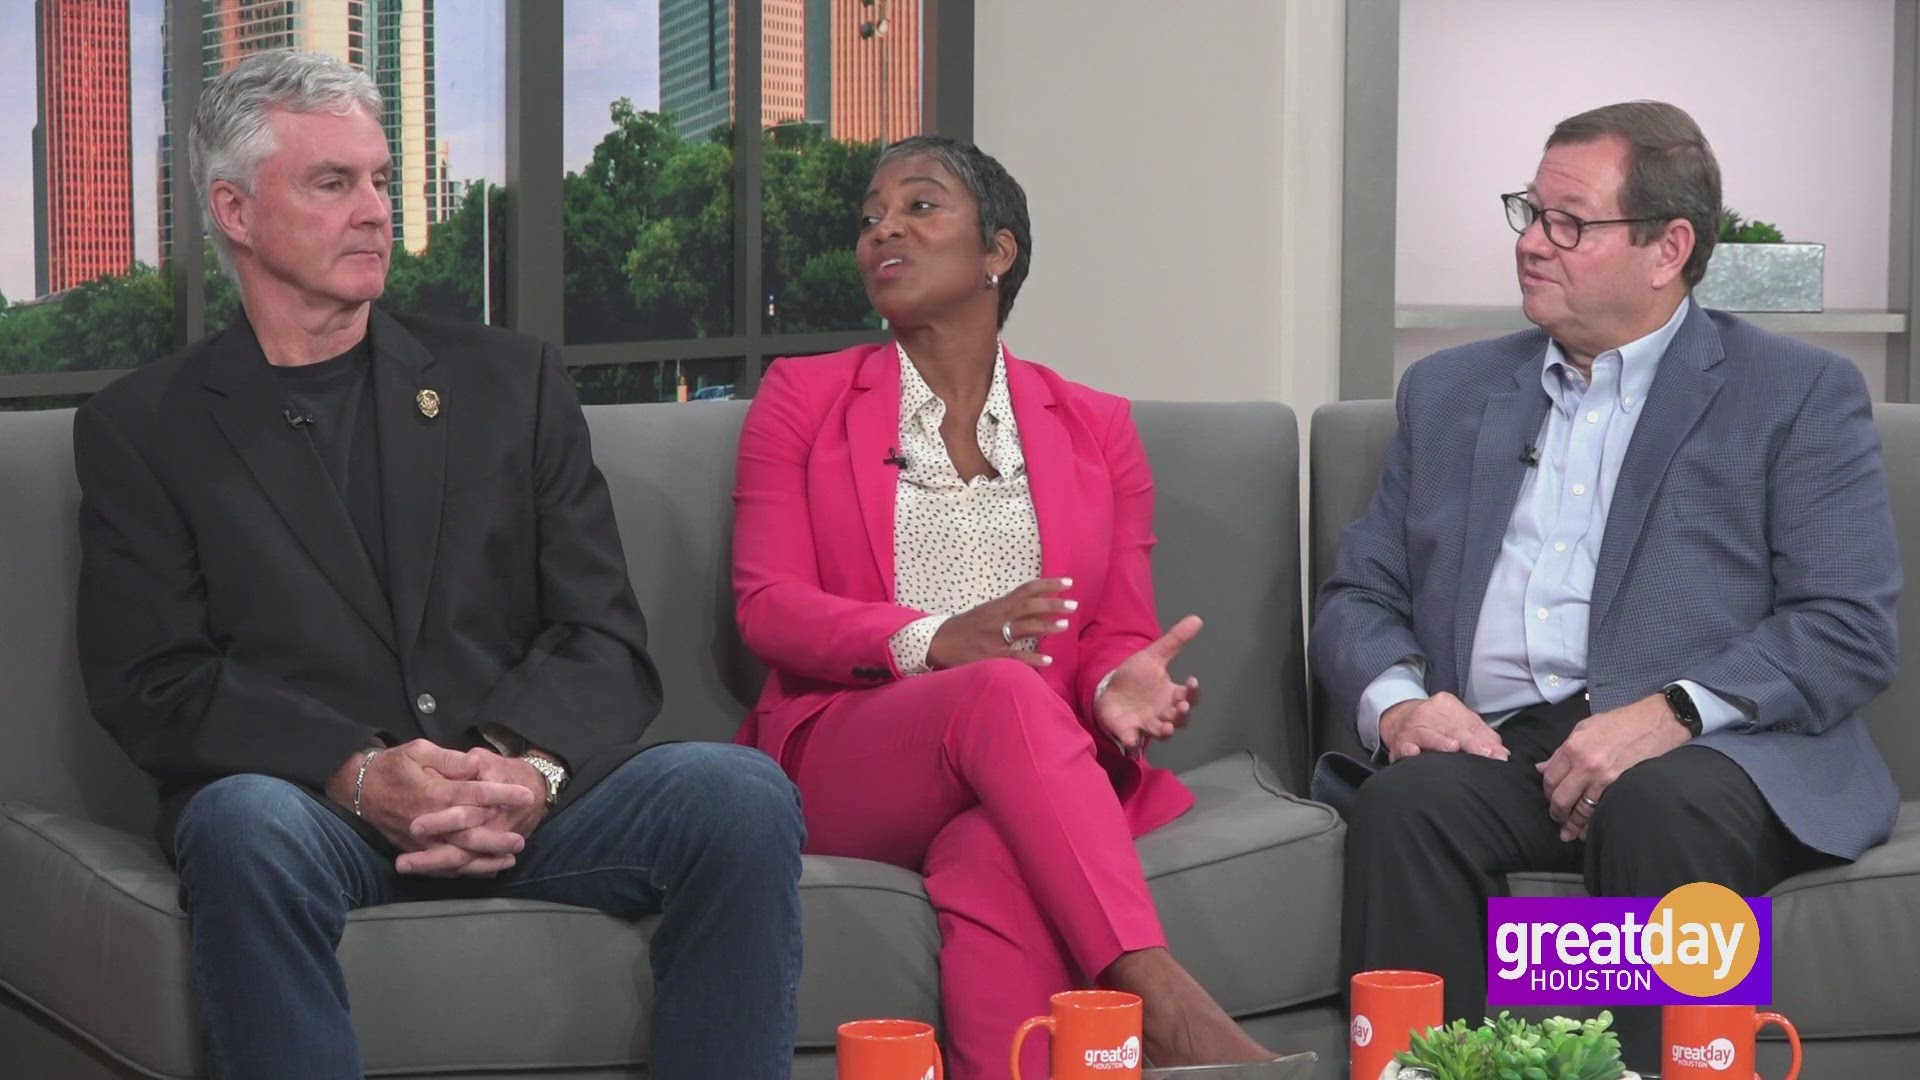 A Private Investigator, Family Attorney & Director of Pastoral Ministries at Second Baptist Church join Great Day to answer viewers' questions about marriage.